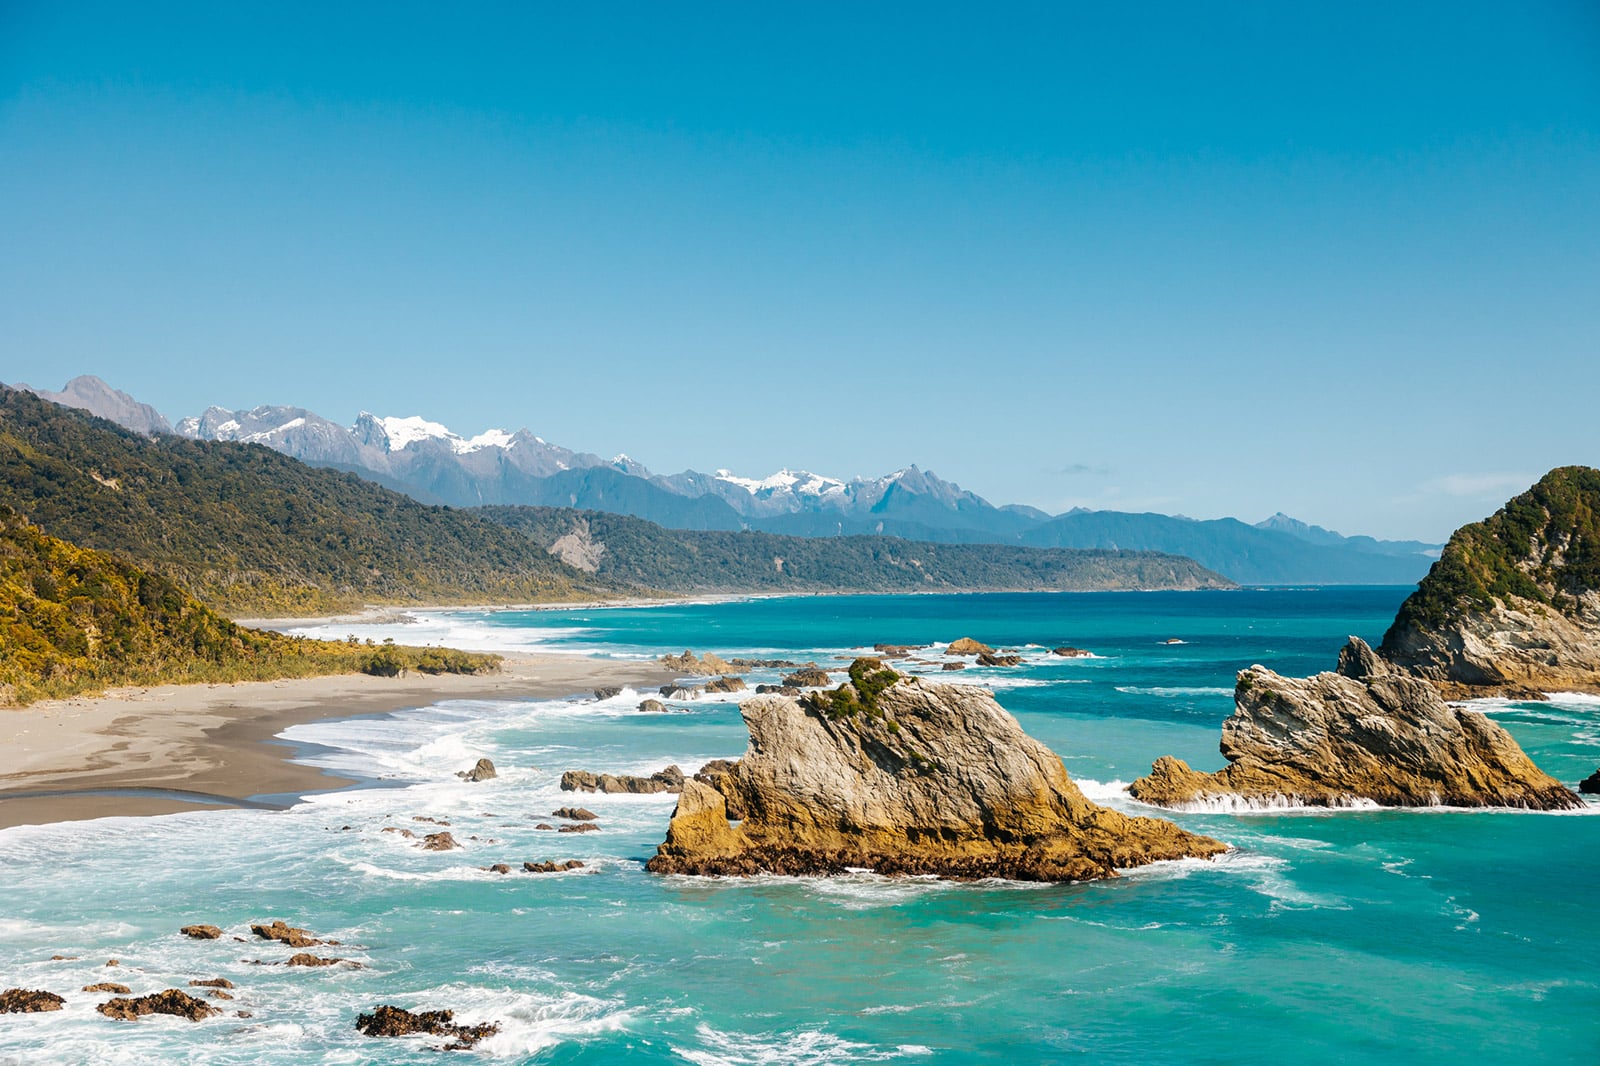 Milford Sounds Heli Wedding, Luxury elopement in New Zealand, Wedding photos at the beach